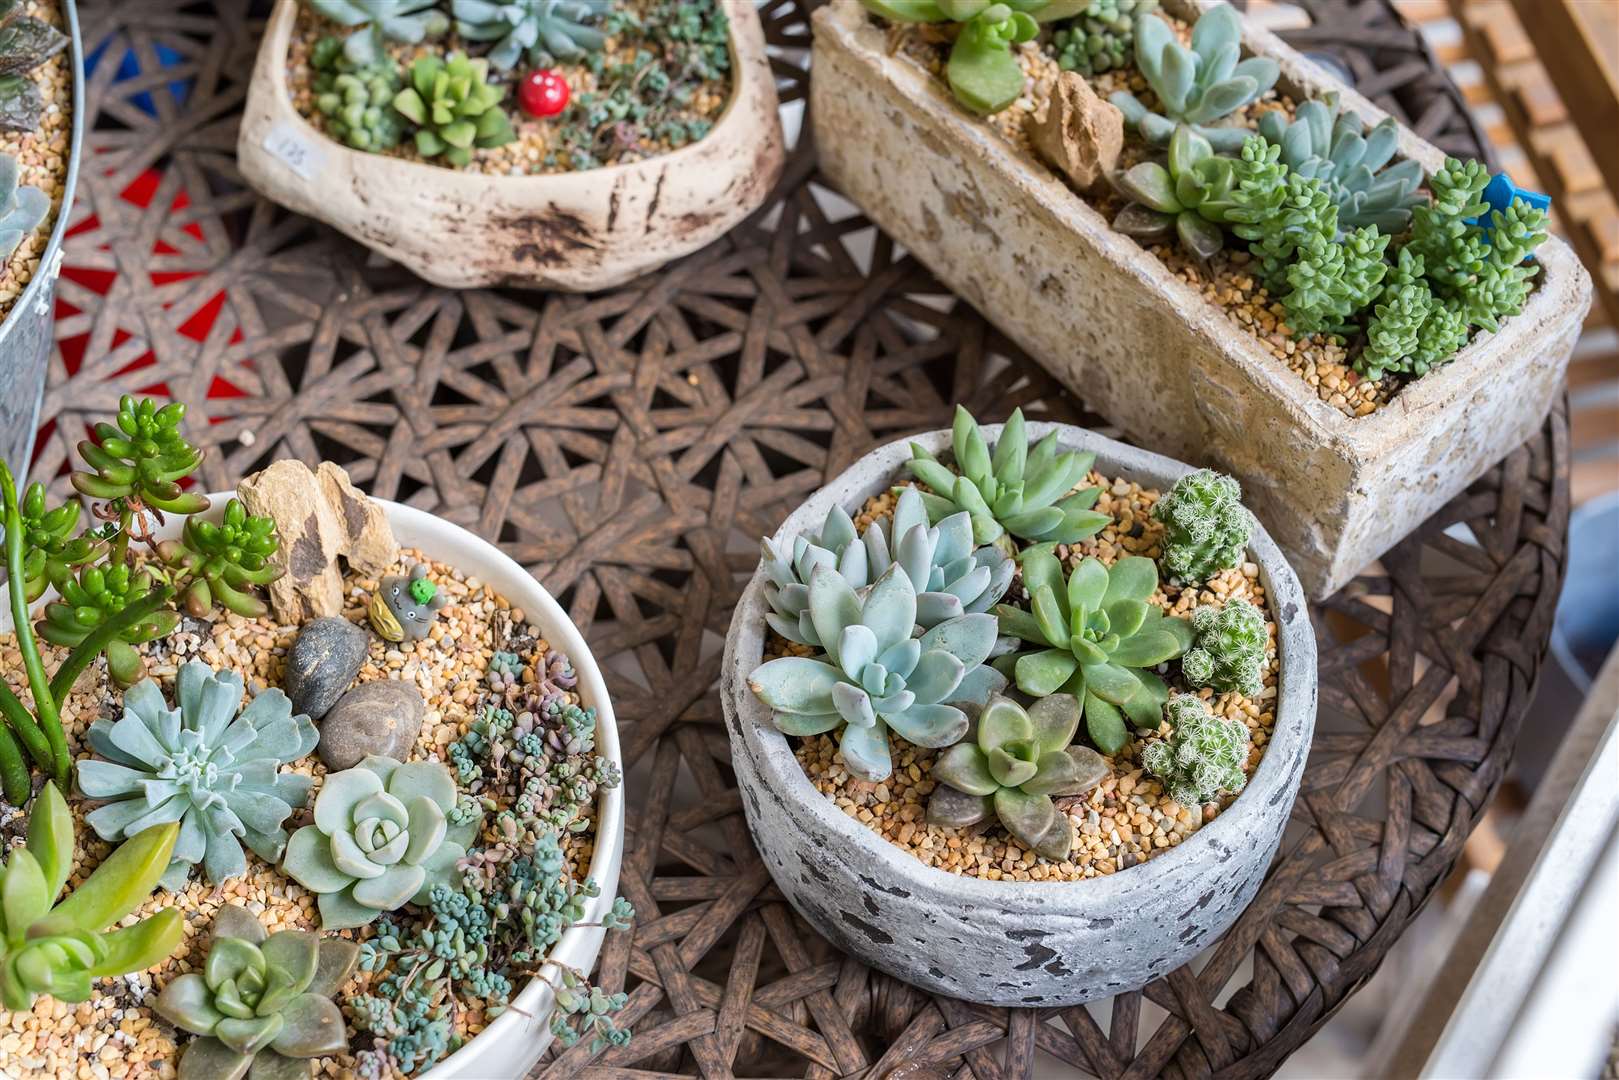 You can raise succulents up high to get a closer look. Picture: iStock/PA